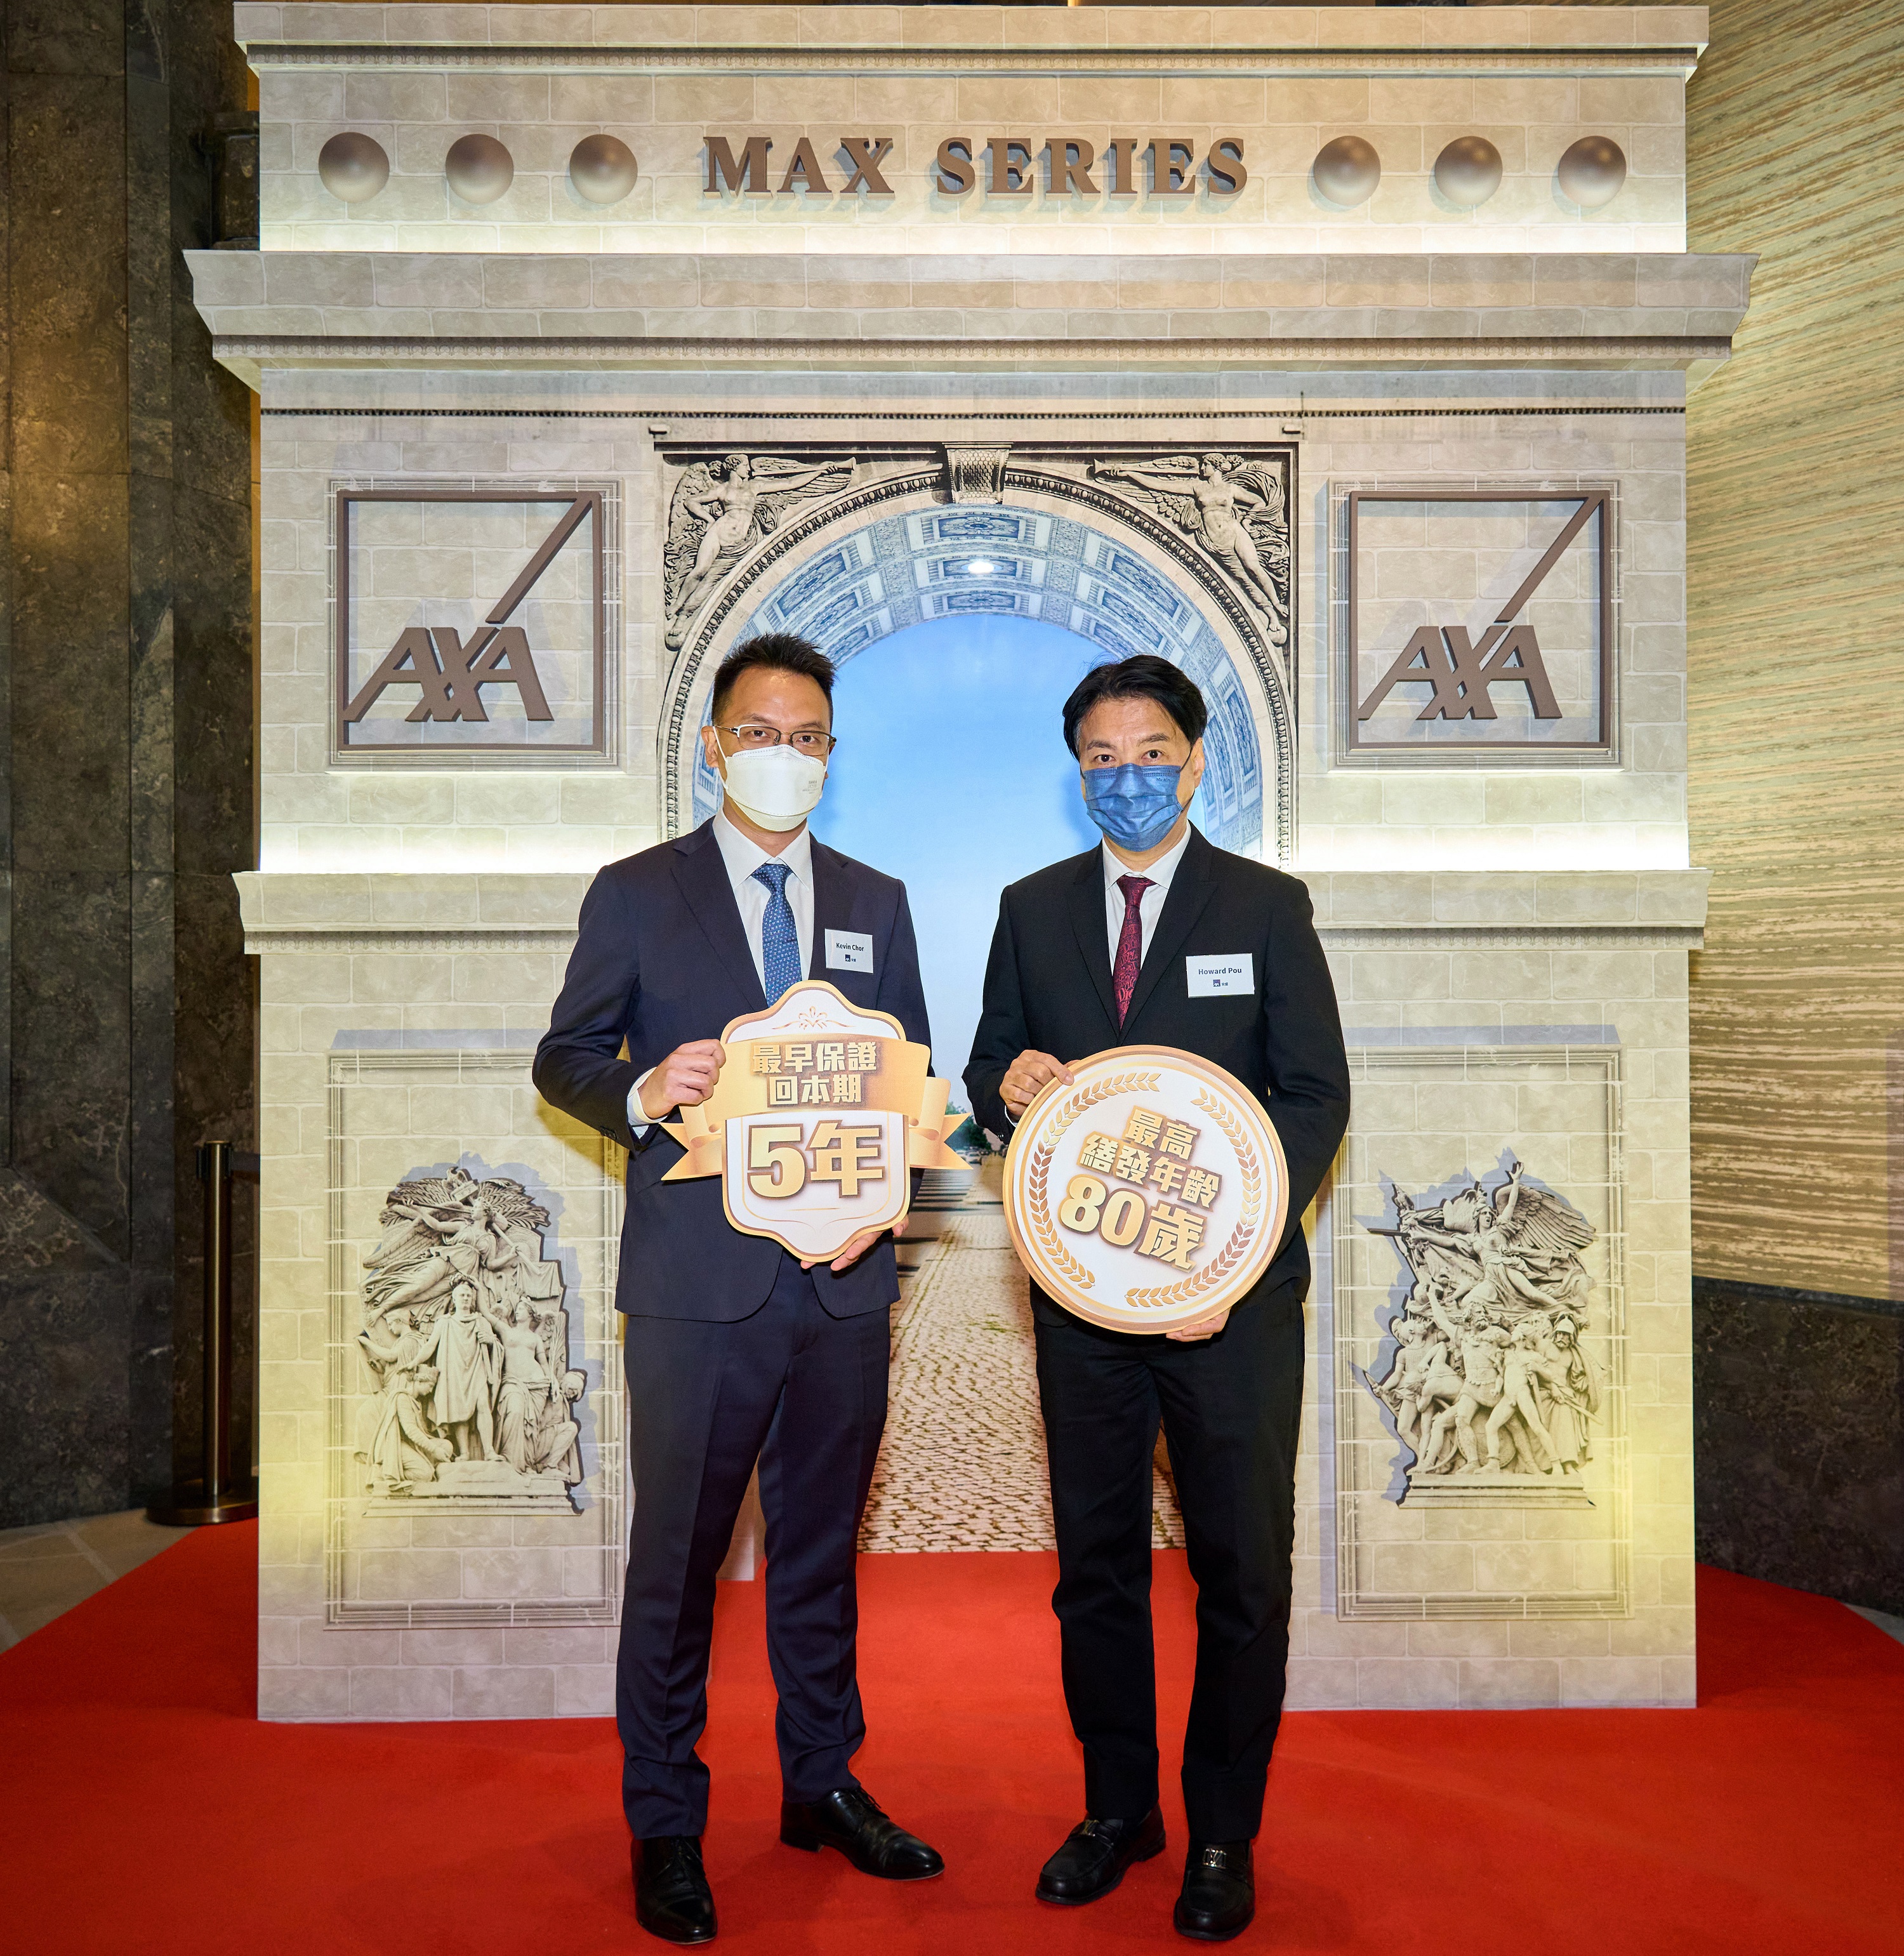 AXA Hong Kong and Macau today announced the launch of its Max Wealth Insurance Plan. (From left: Kevin Chor, Chief Life and Health Insurance Officer, AXA Hong Kong and Macau, and Howard Pou, Chief Distribution Officer, AXA Greater China)